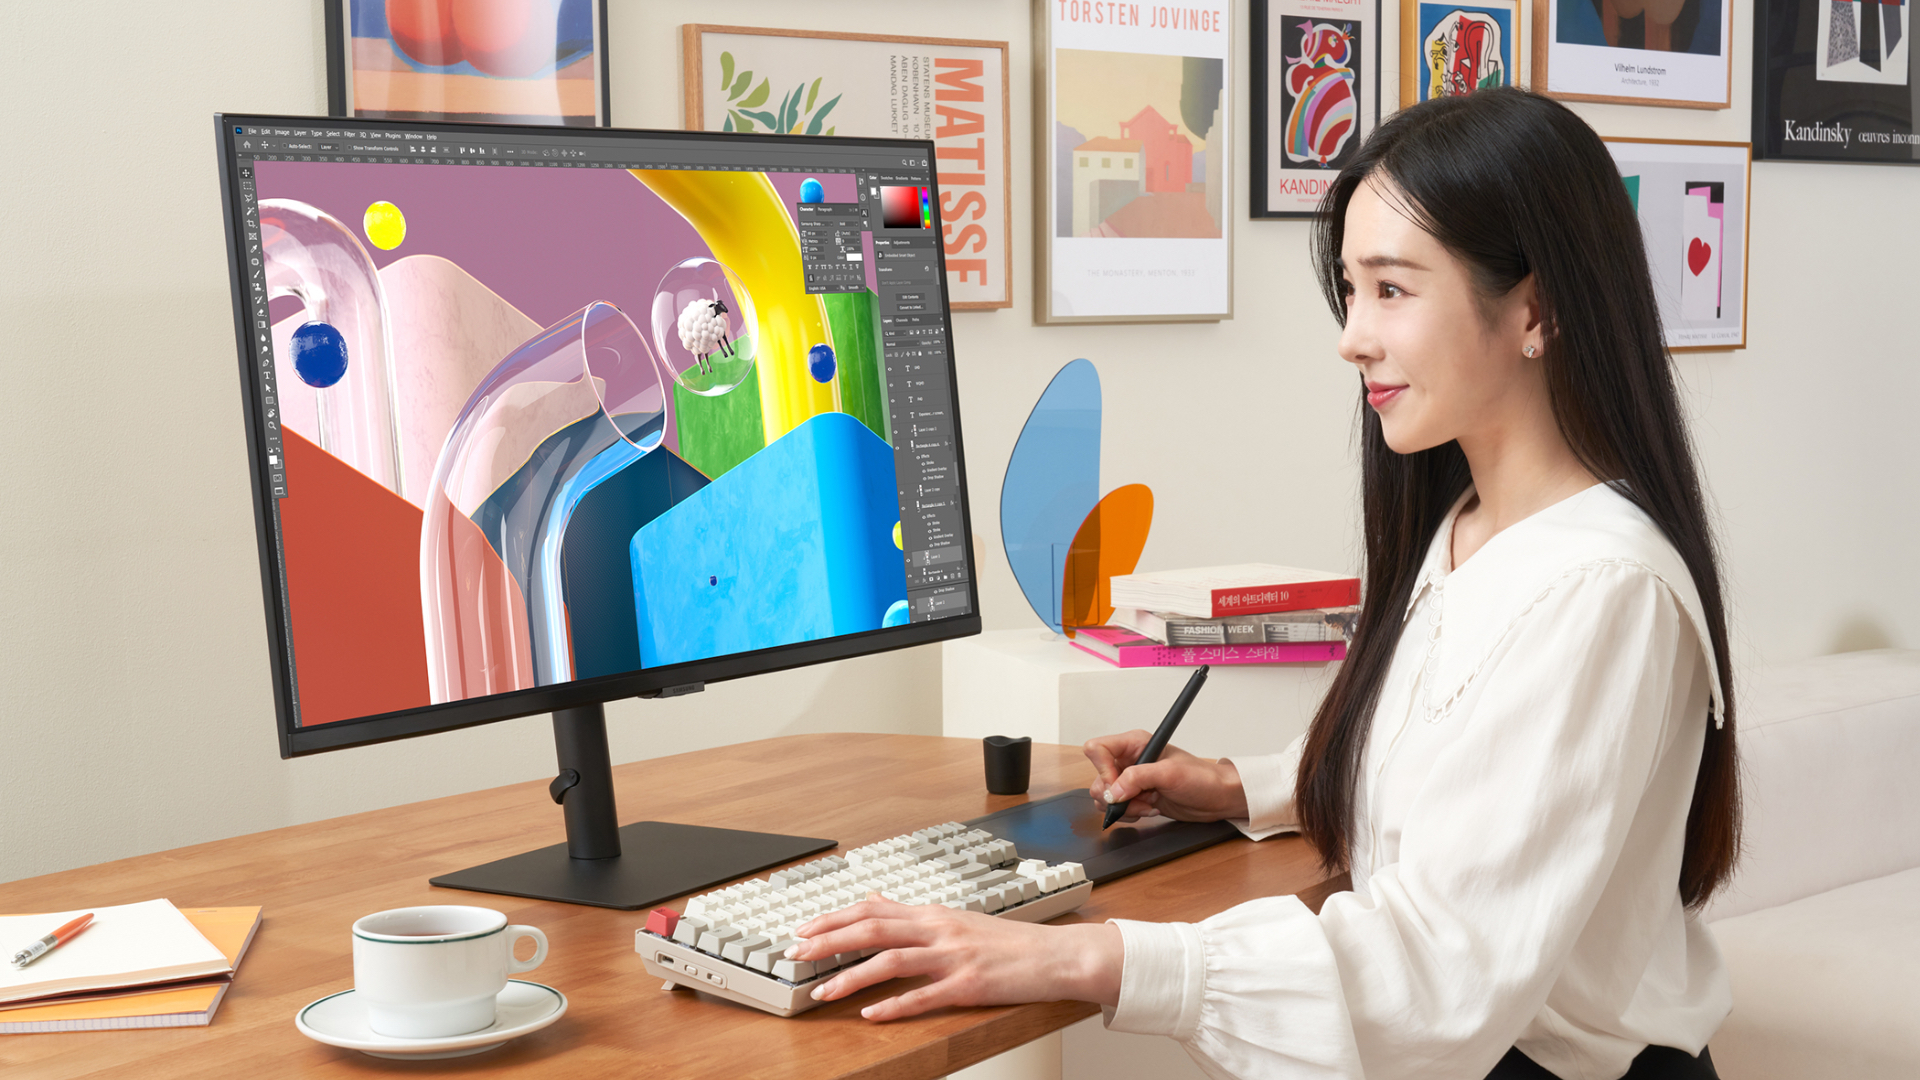 Samsung’s ViewFinity S8 4K monitor is made for content creators, professionals